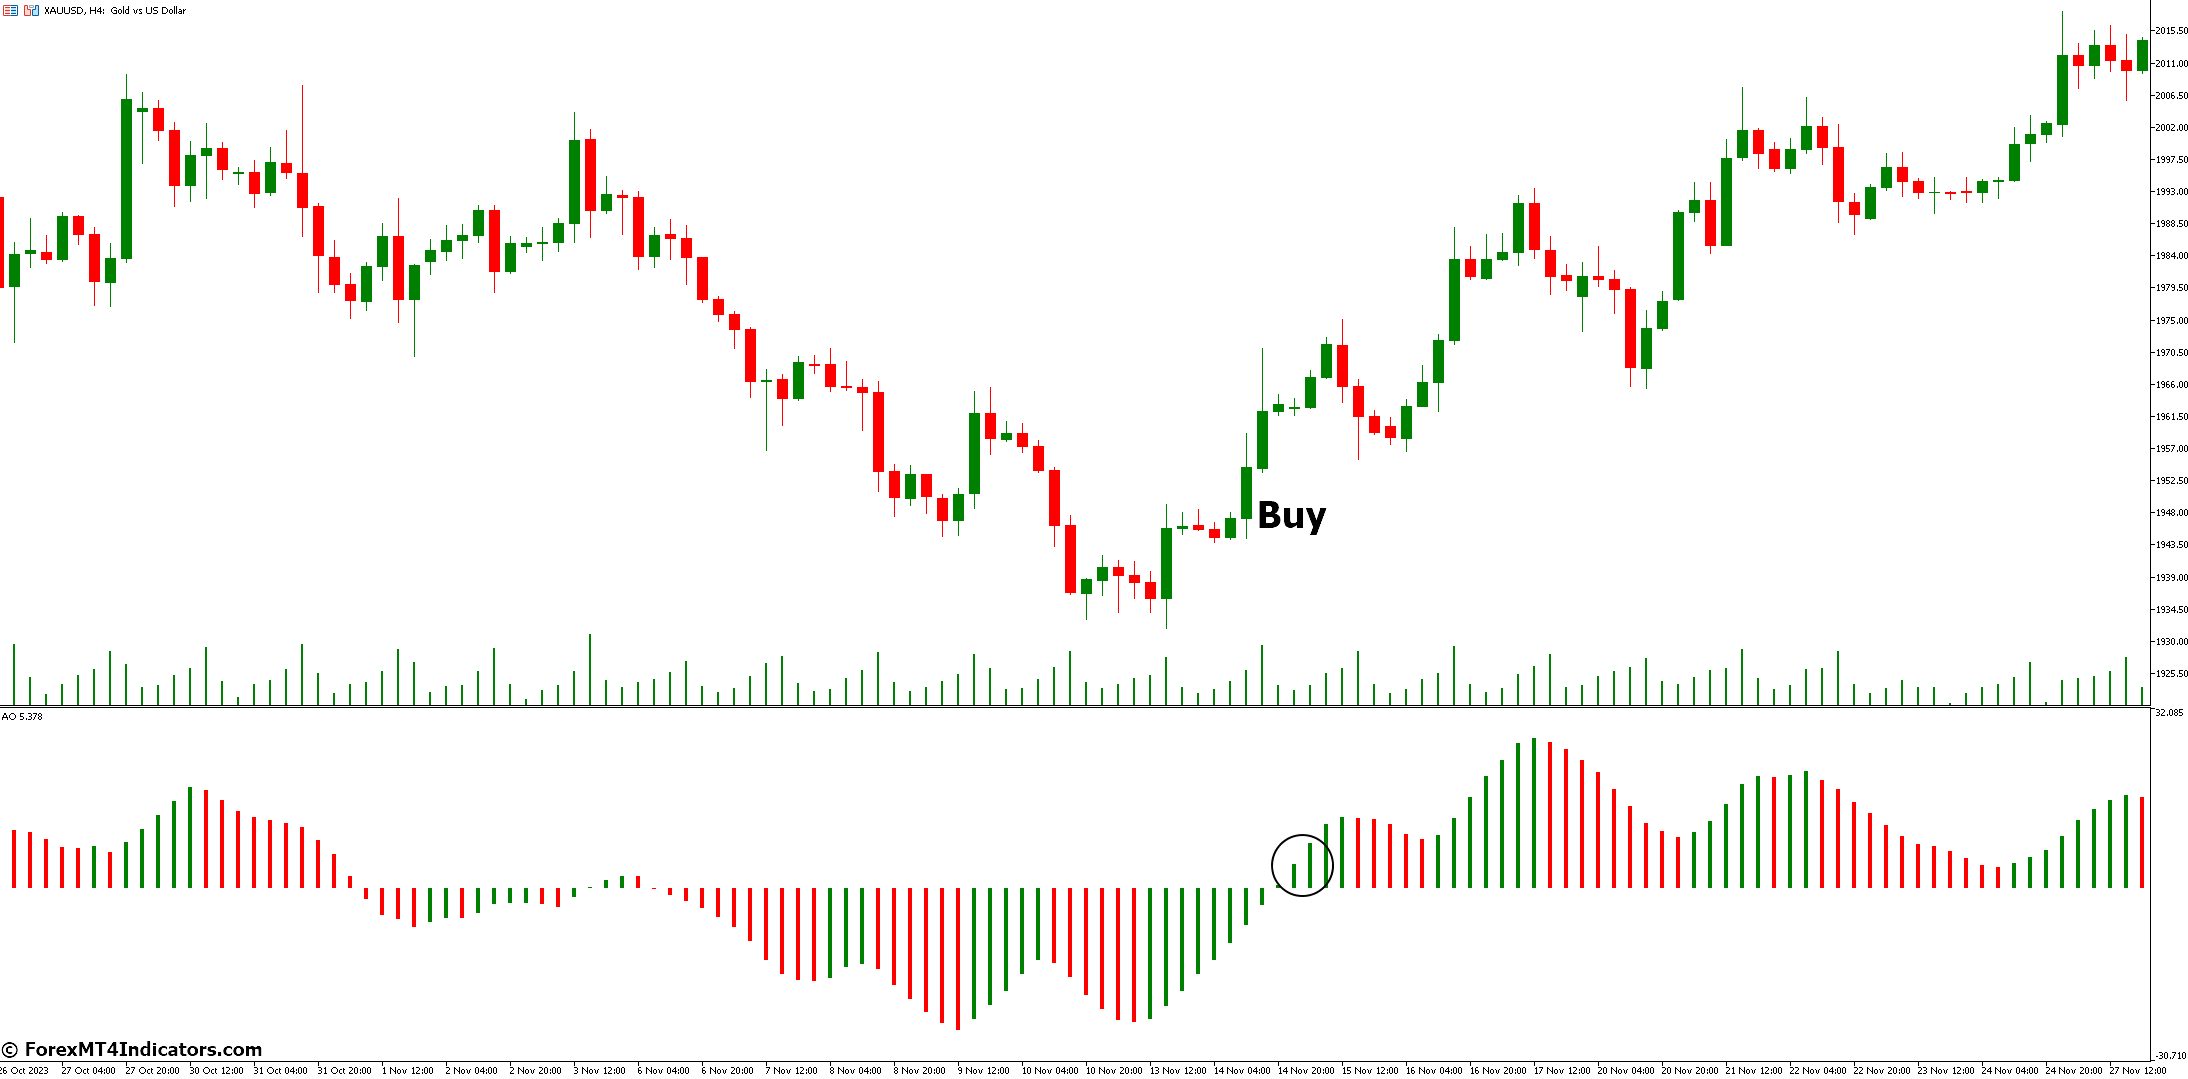 How to Trade with Awesome Oscillator Indicator - Buy Entry